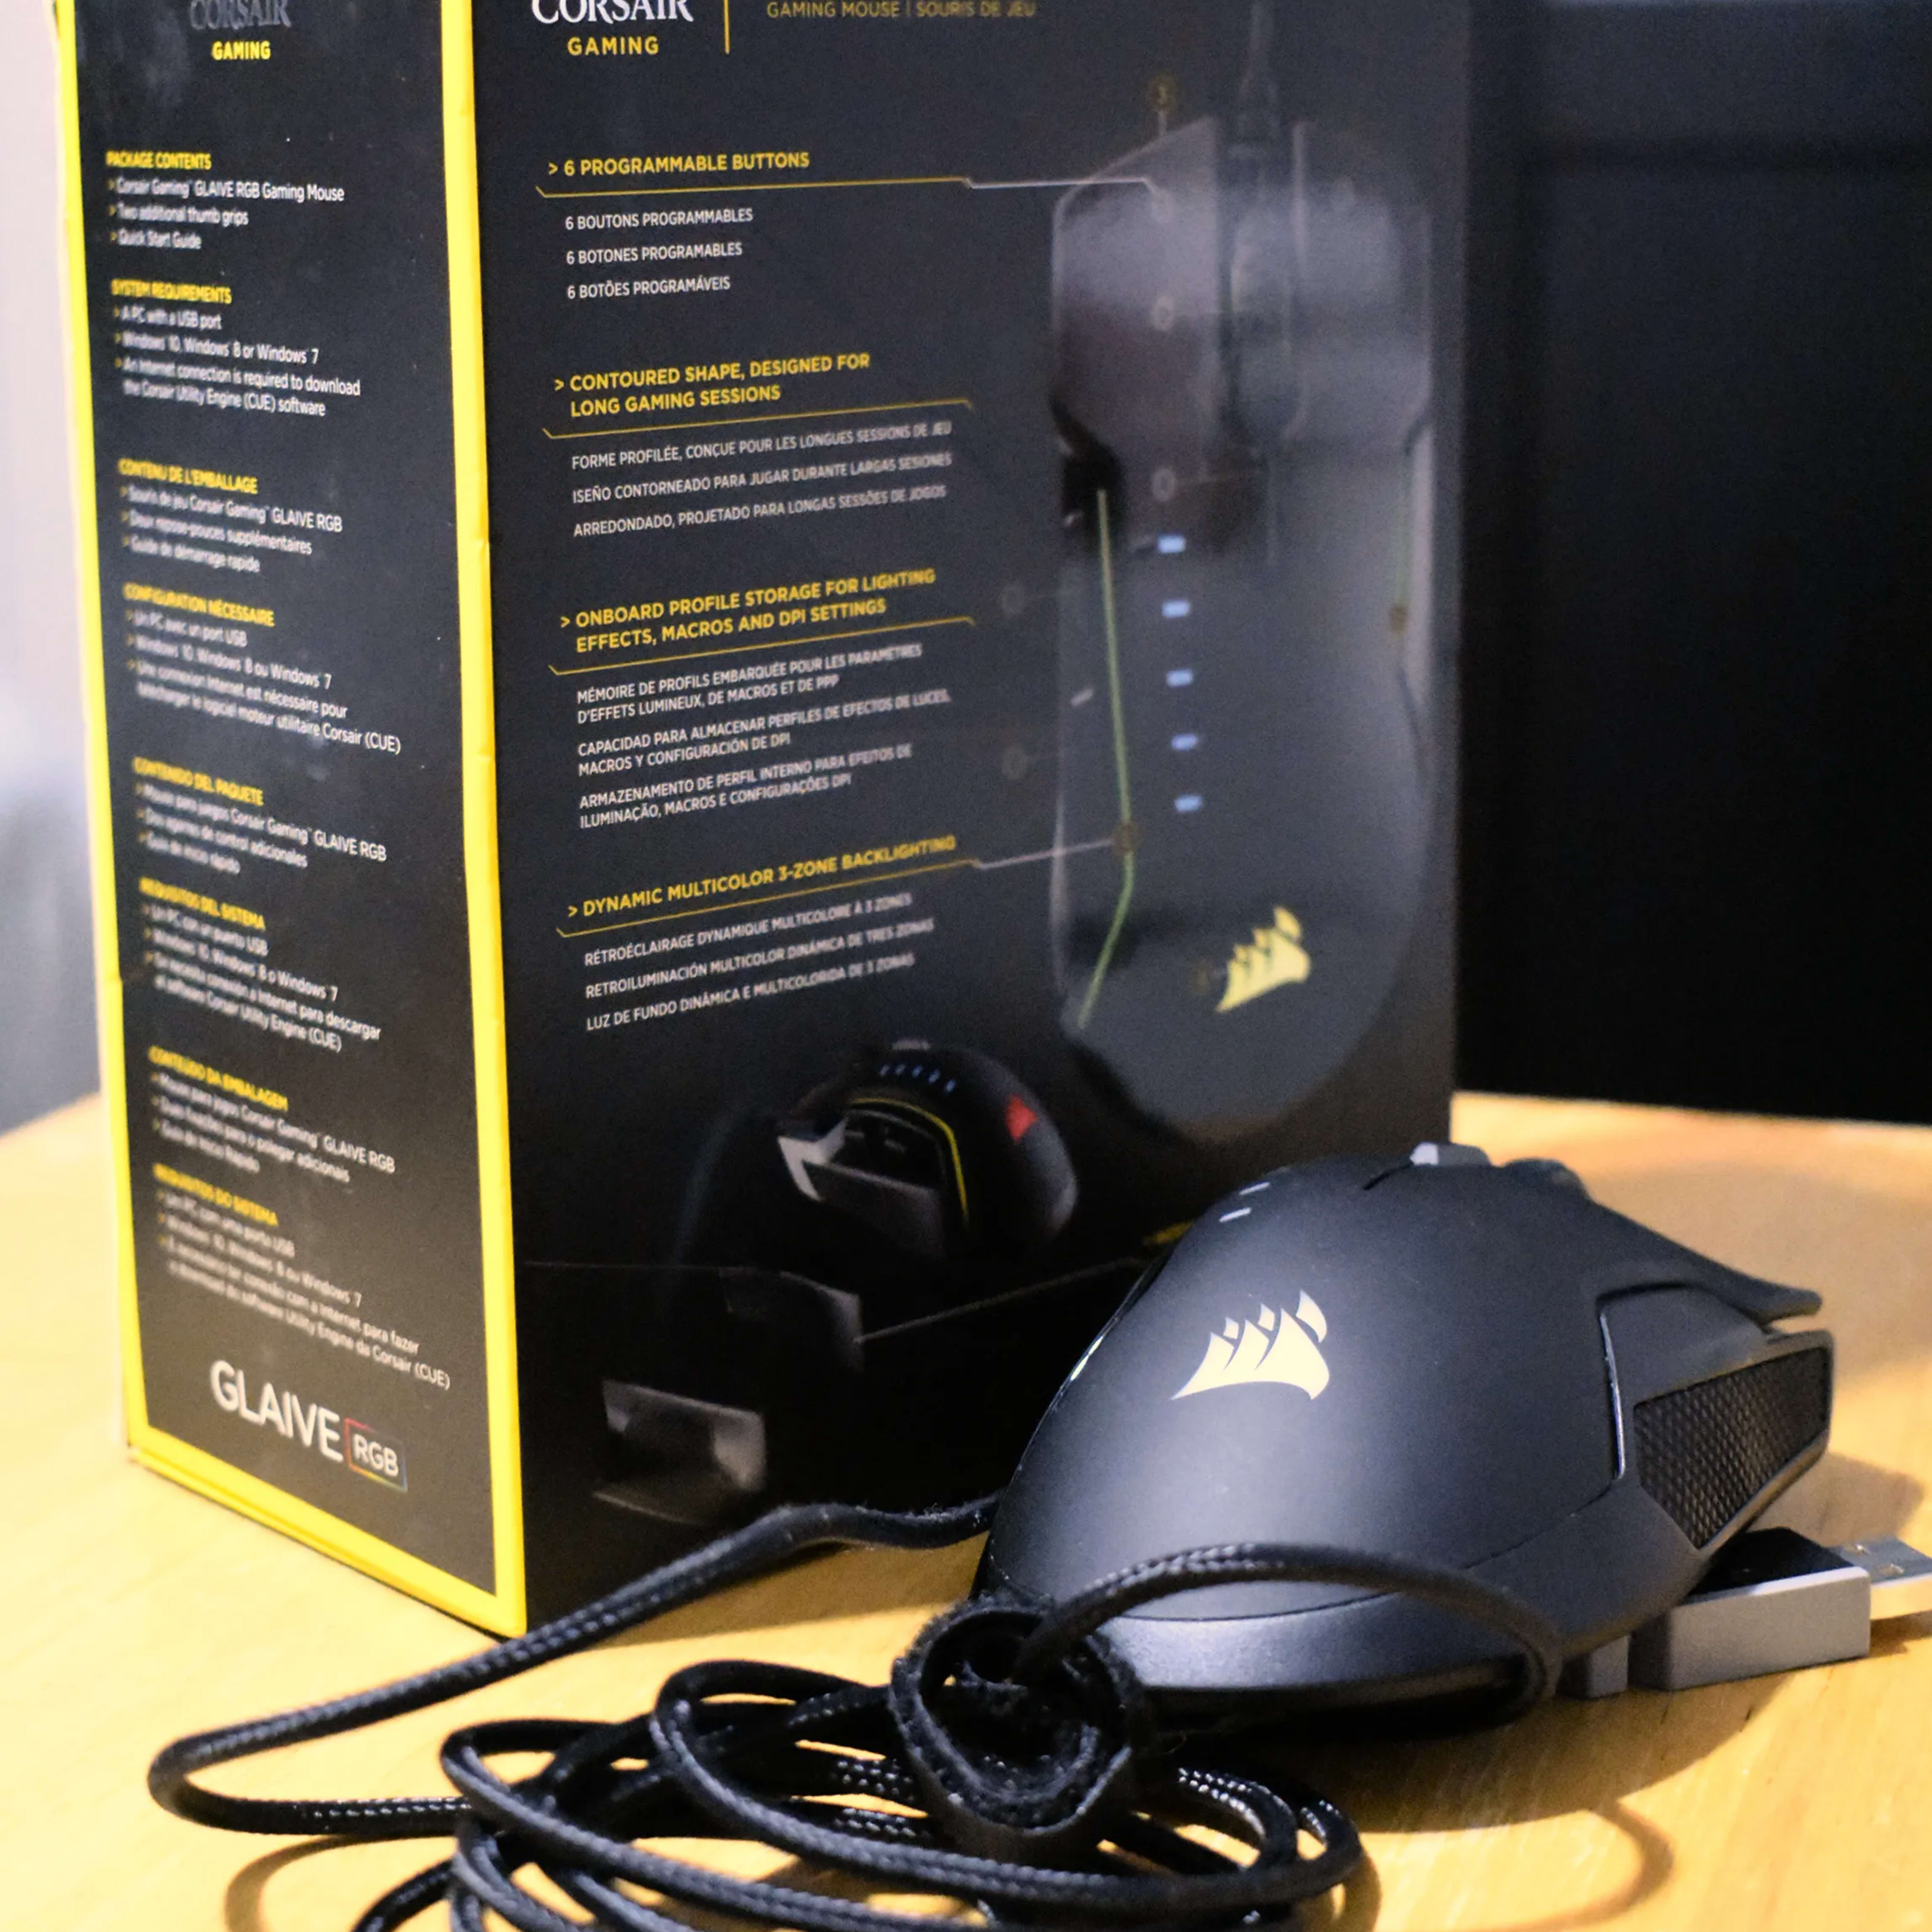 Corsair GLAIVE RGB Wired Optical Mouse 16,000 DPI Model